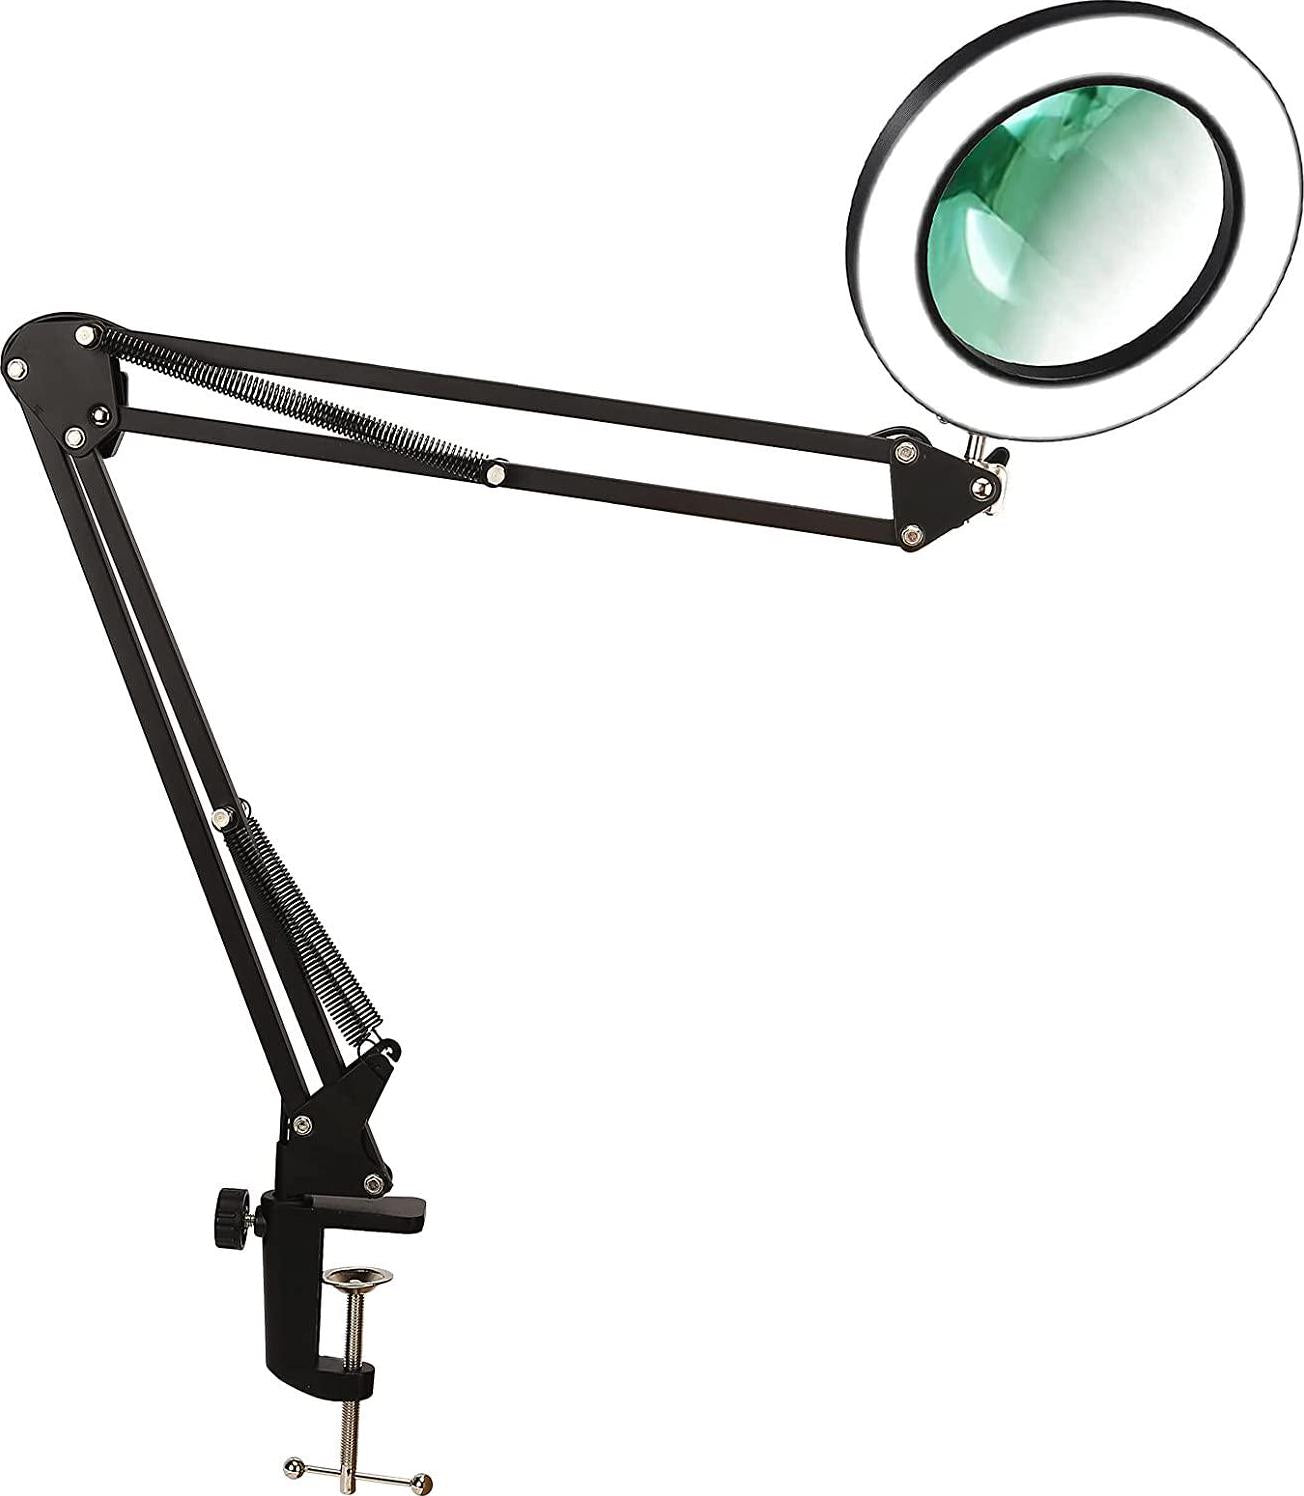 AKRIL, Magnifying Glass Lamp with Clamp, 8X Real Glass Lens Magnifier, 3 Color Modes,10 Stepless Dimmable, Adjustable Swivel Arm, Bright LED Light for Reading, Circuit Boards Repairing, Sewing, Needle Crafts